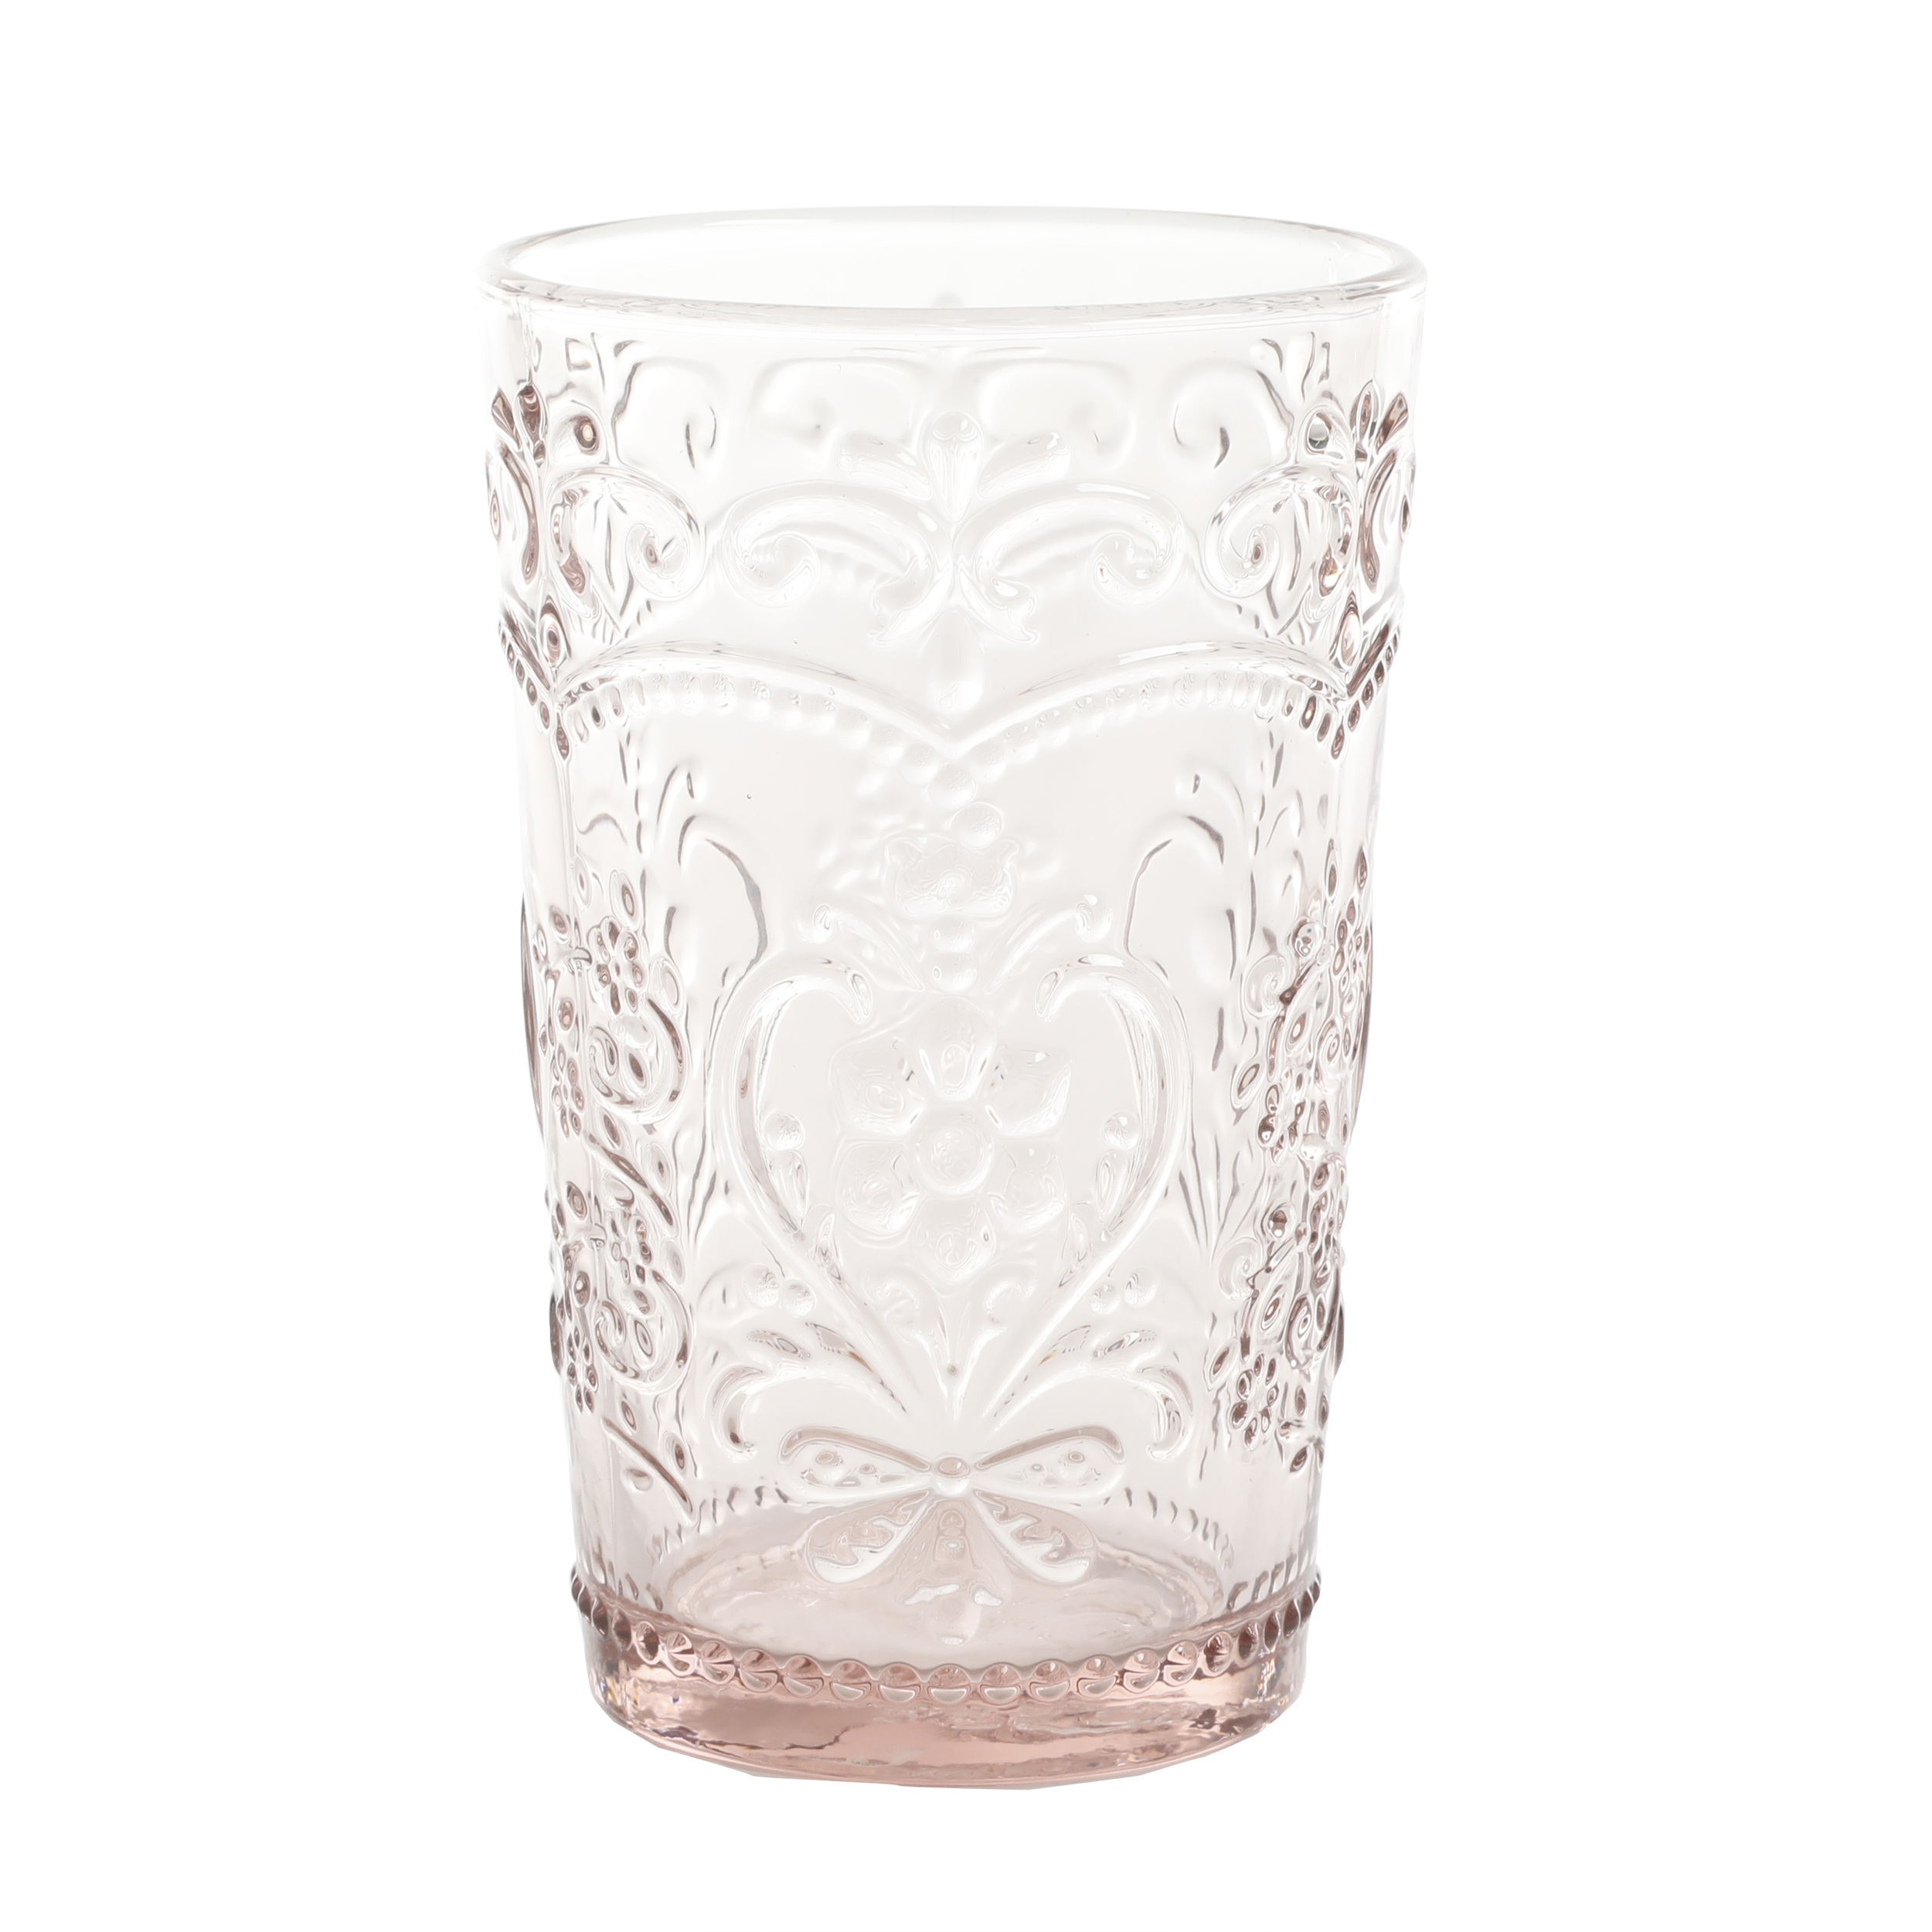 The Pioneer Woman Amelia Pink 15.22-Ounce Glass Tumblers, Set of 4 - image 2 of 4